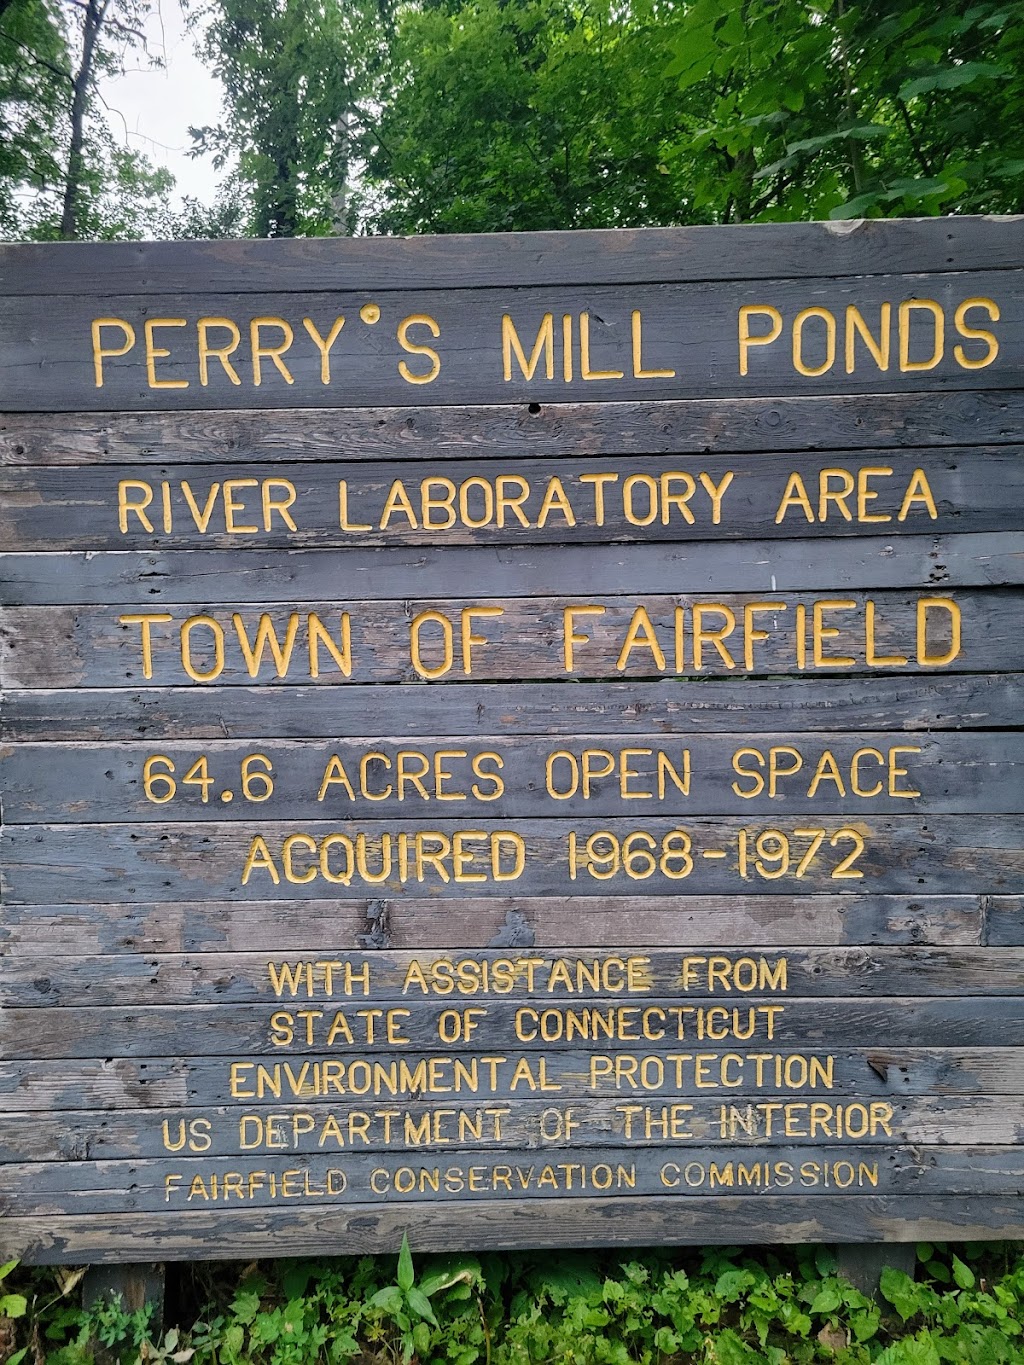 Perrys Mill Ponds | 713-799 Sturges Rd, Fairfield, CT 06824 | Phone: (203) 256-3191